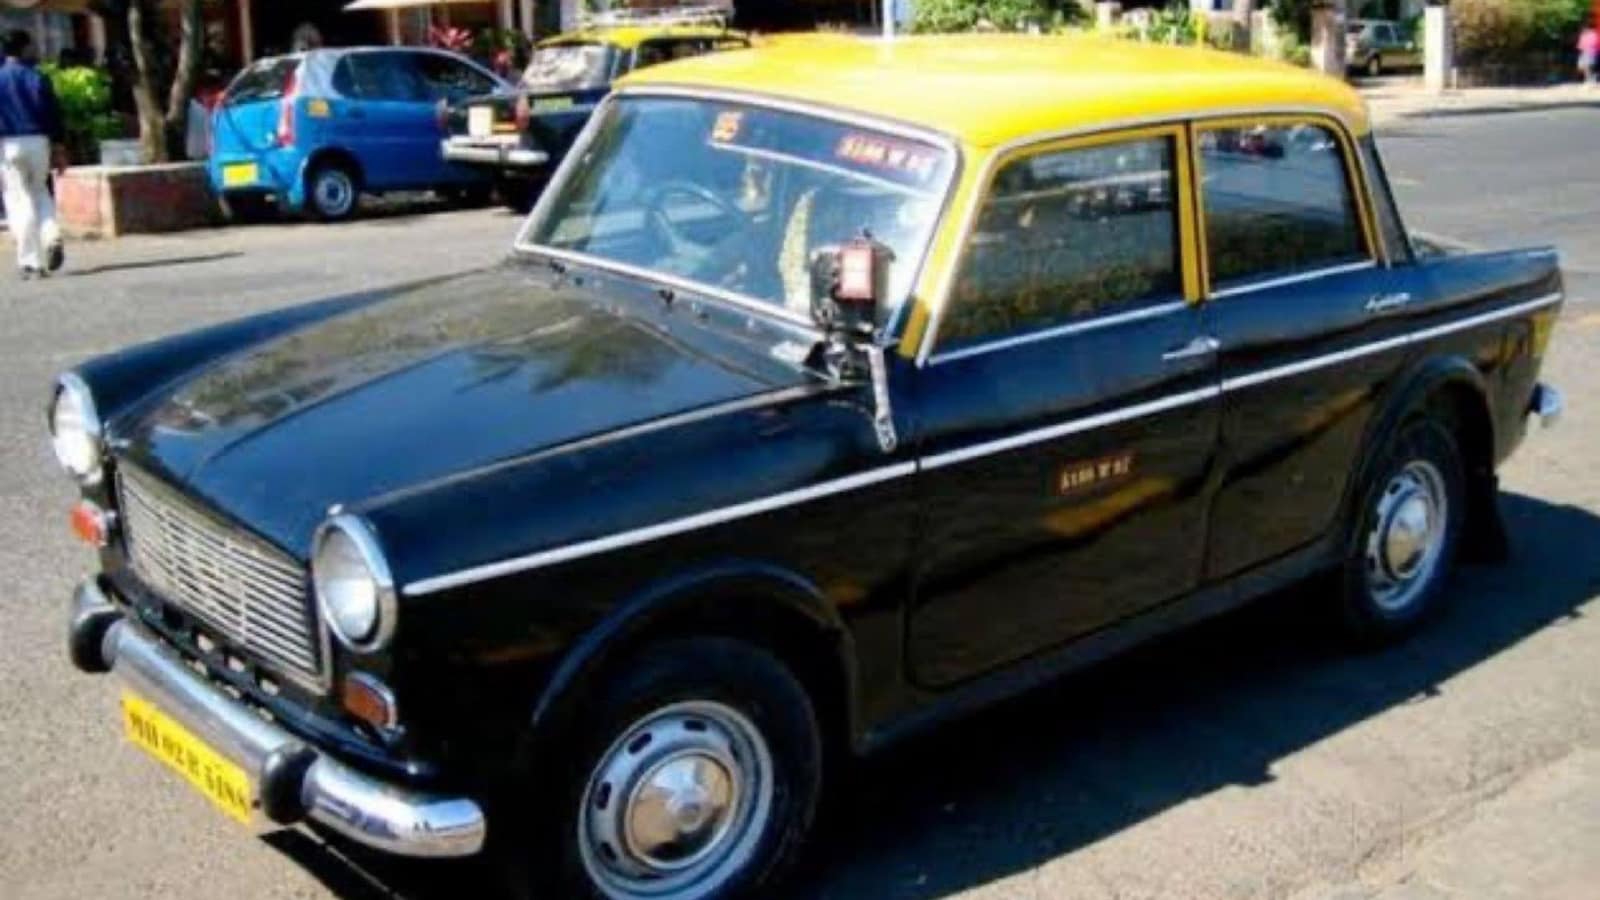 ‘Tons of memories’: Anand Mahindra’s nostalgic post as kaali peeli taxis bow out after 60 years